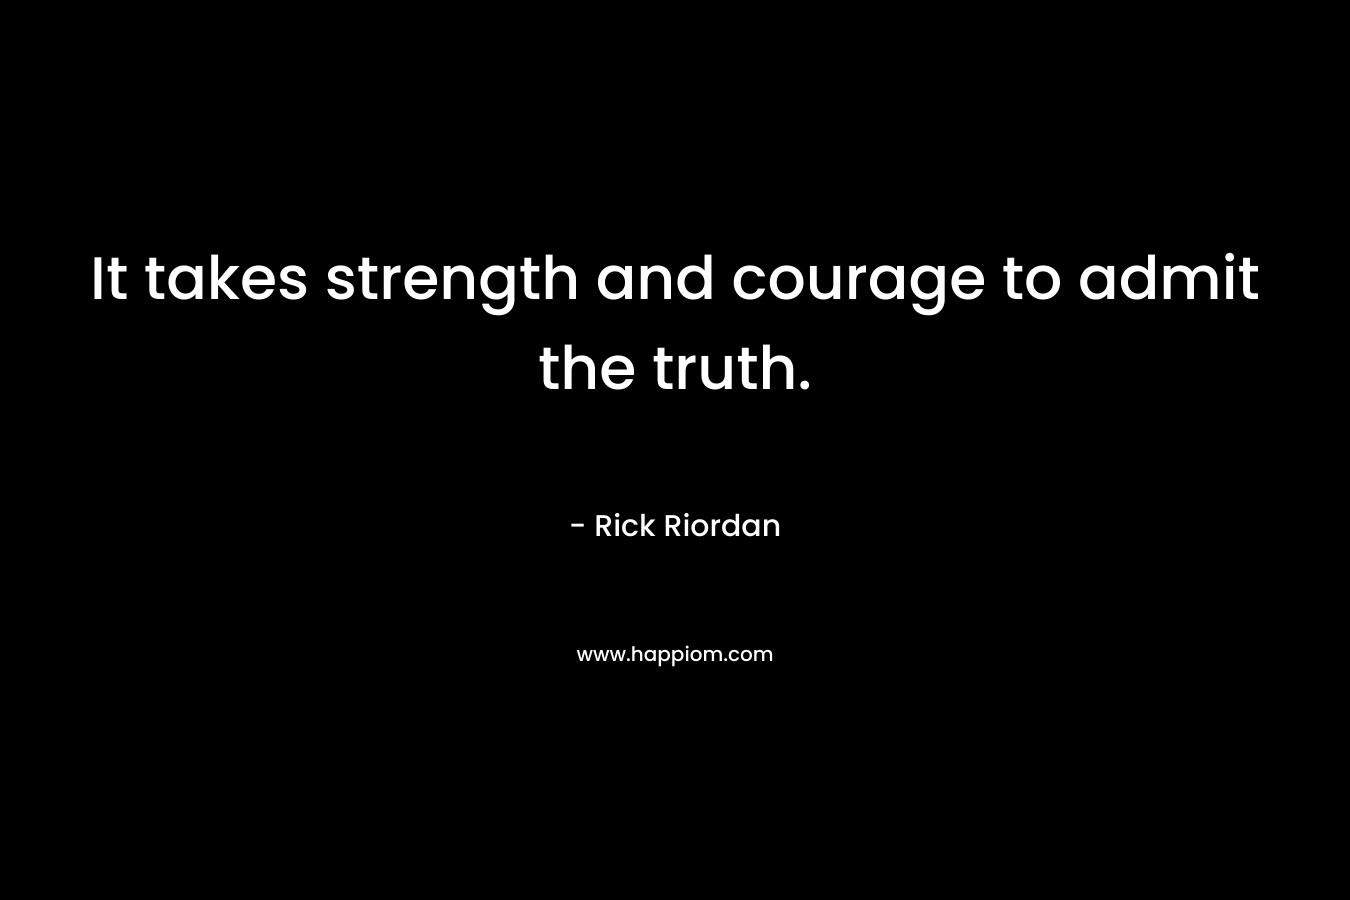 It takes strength and courage to admit the truth.